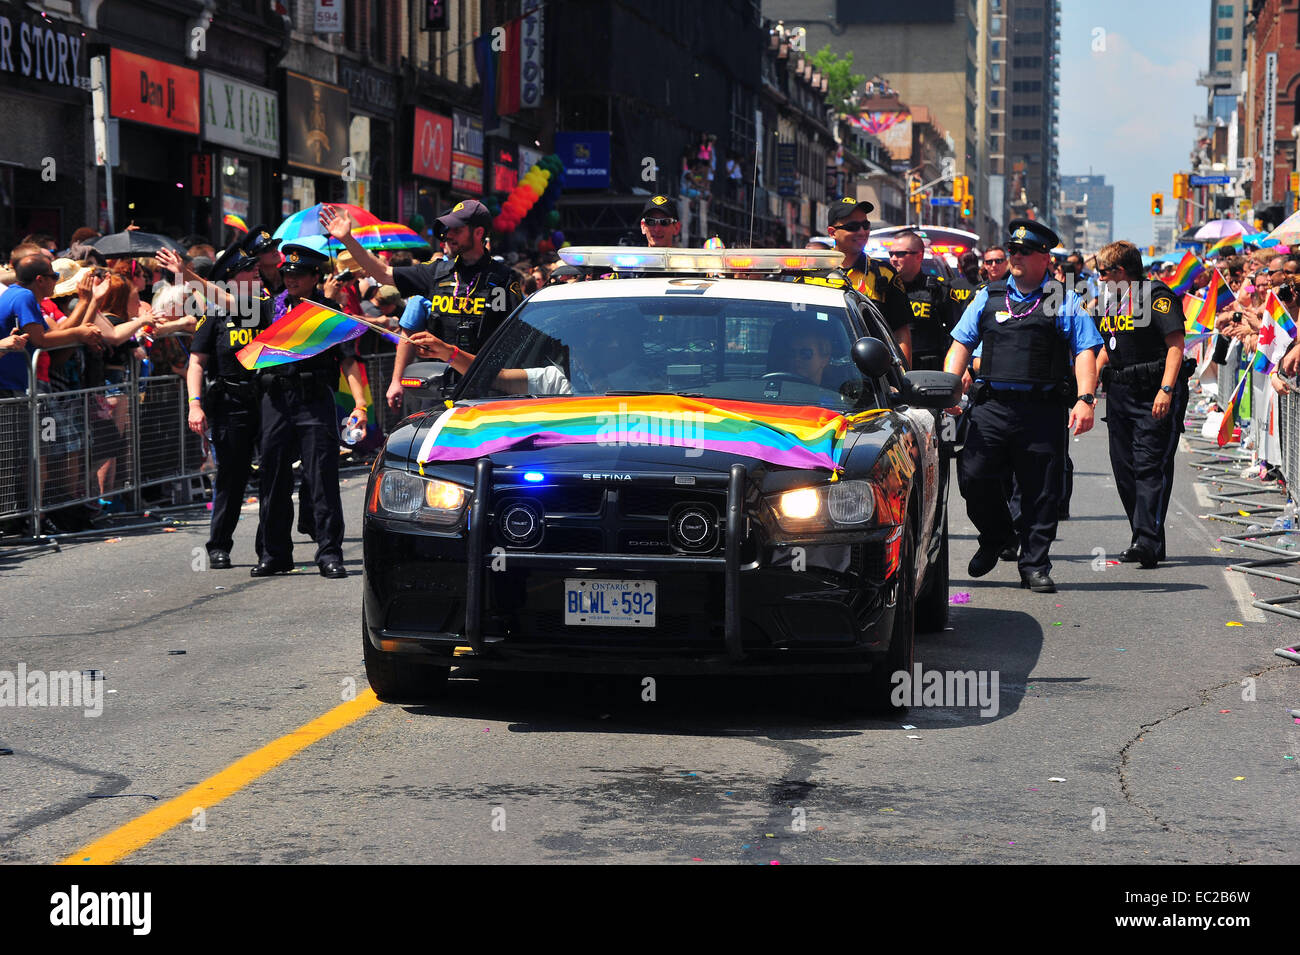 Canadian police at the 2014 World Pride in Toronto. Stock Photo